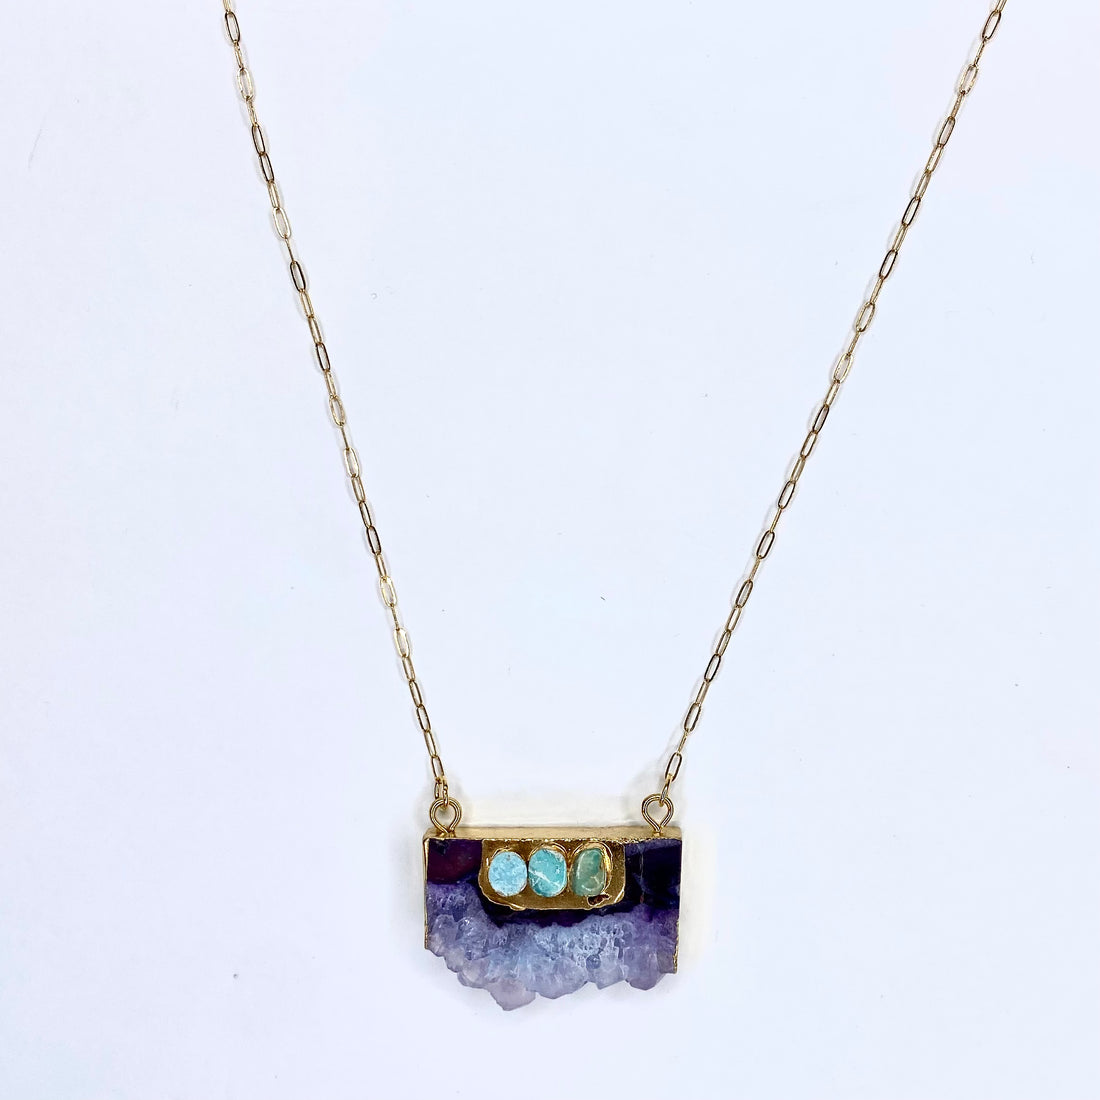 Light Turquoise and Ametrine Crystal Necklace